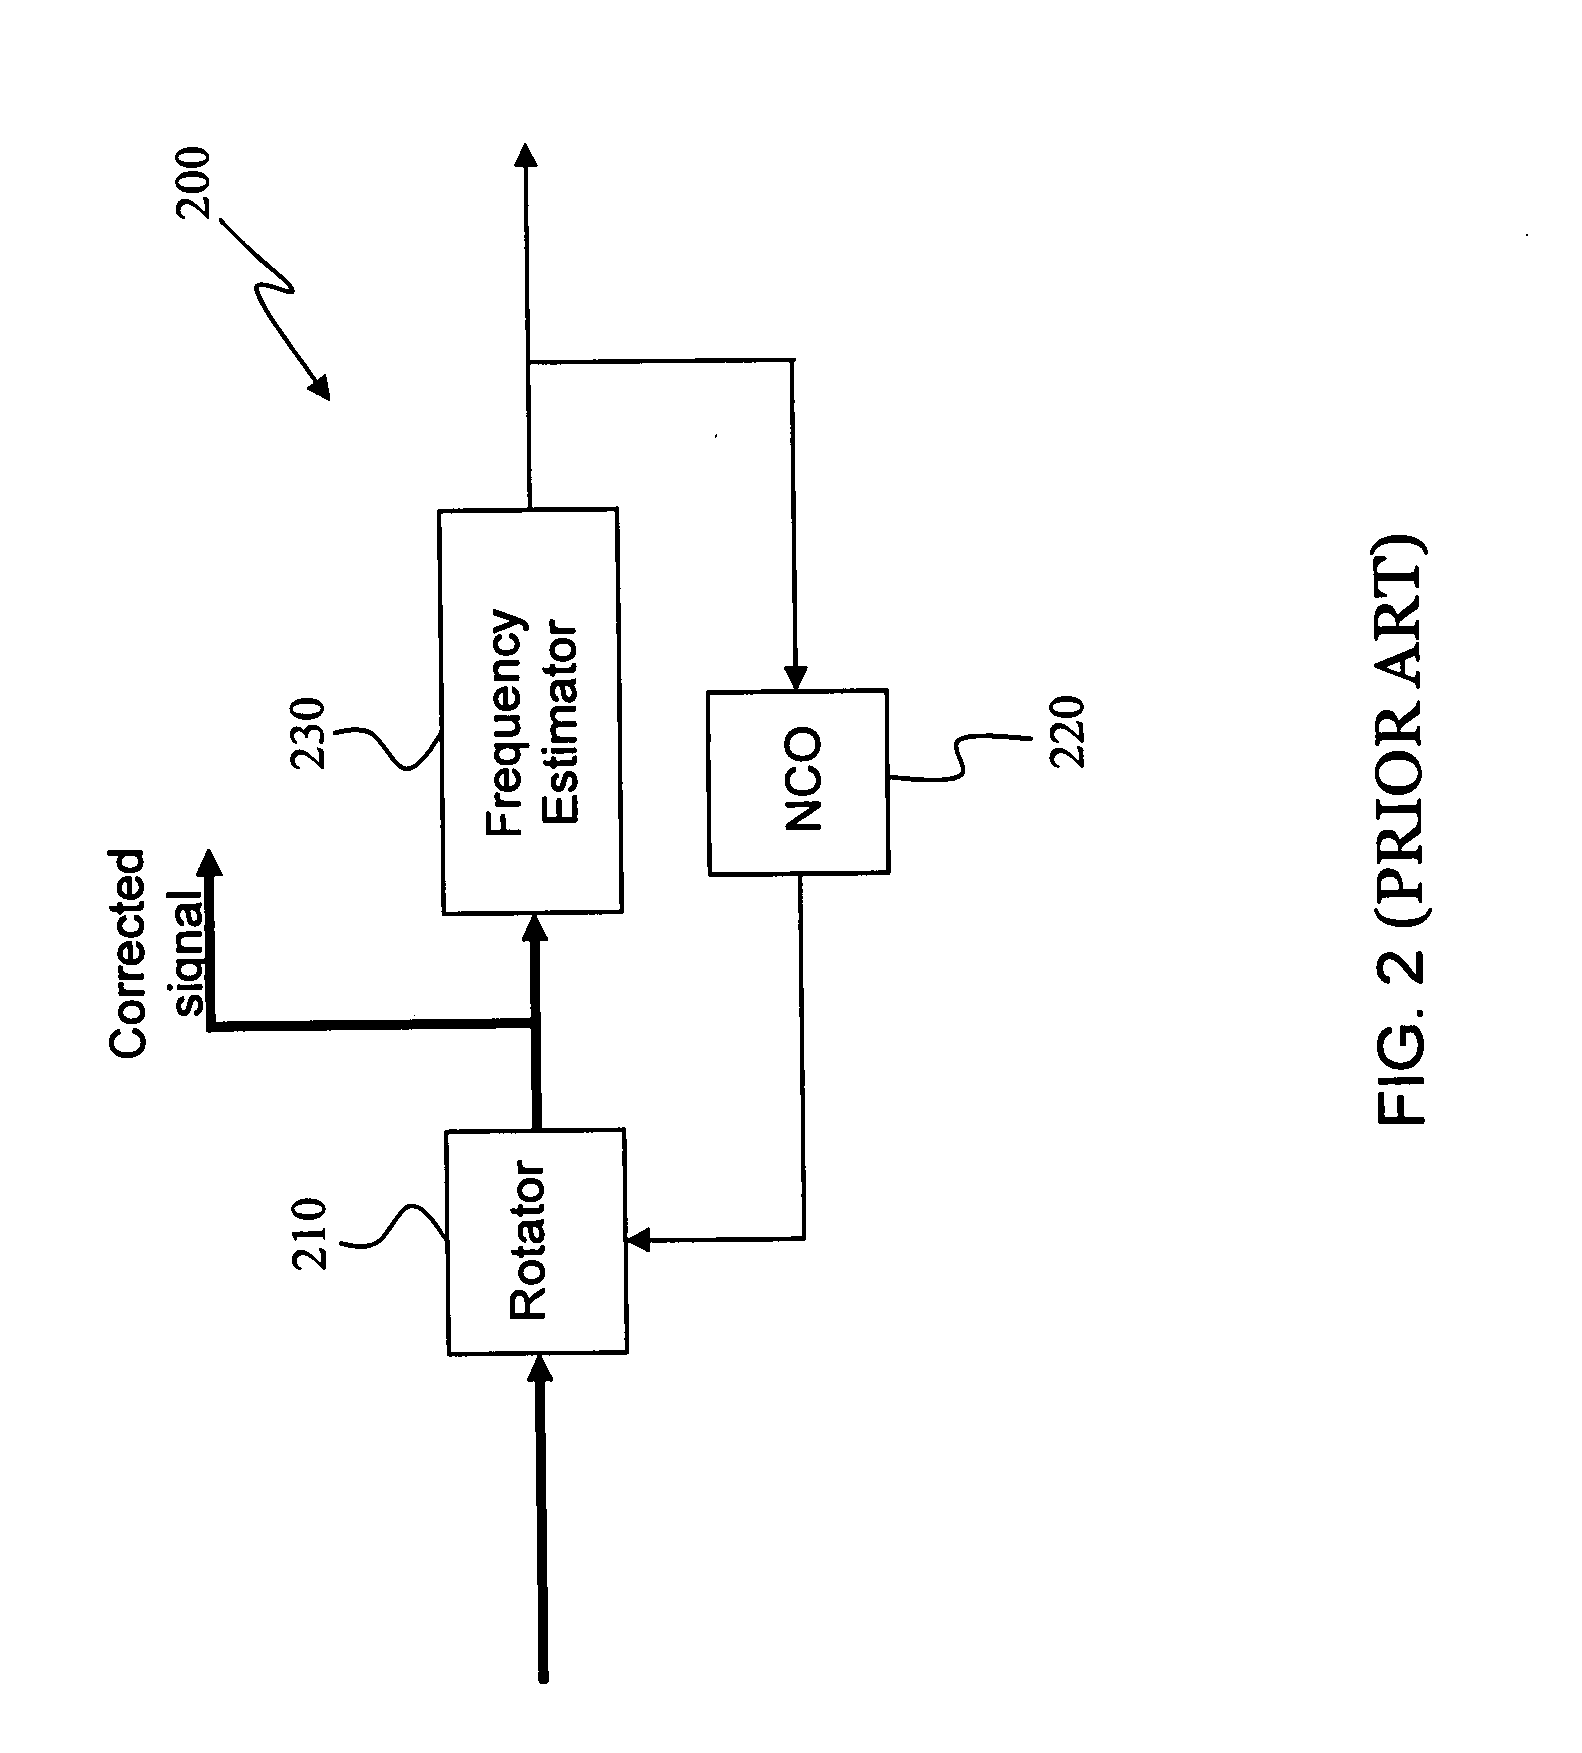 Apparatus and method for frequency estimation in the presence of narrowband gaussian noise